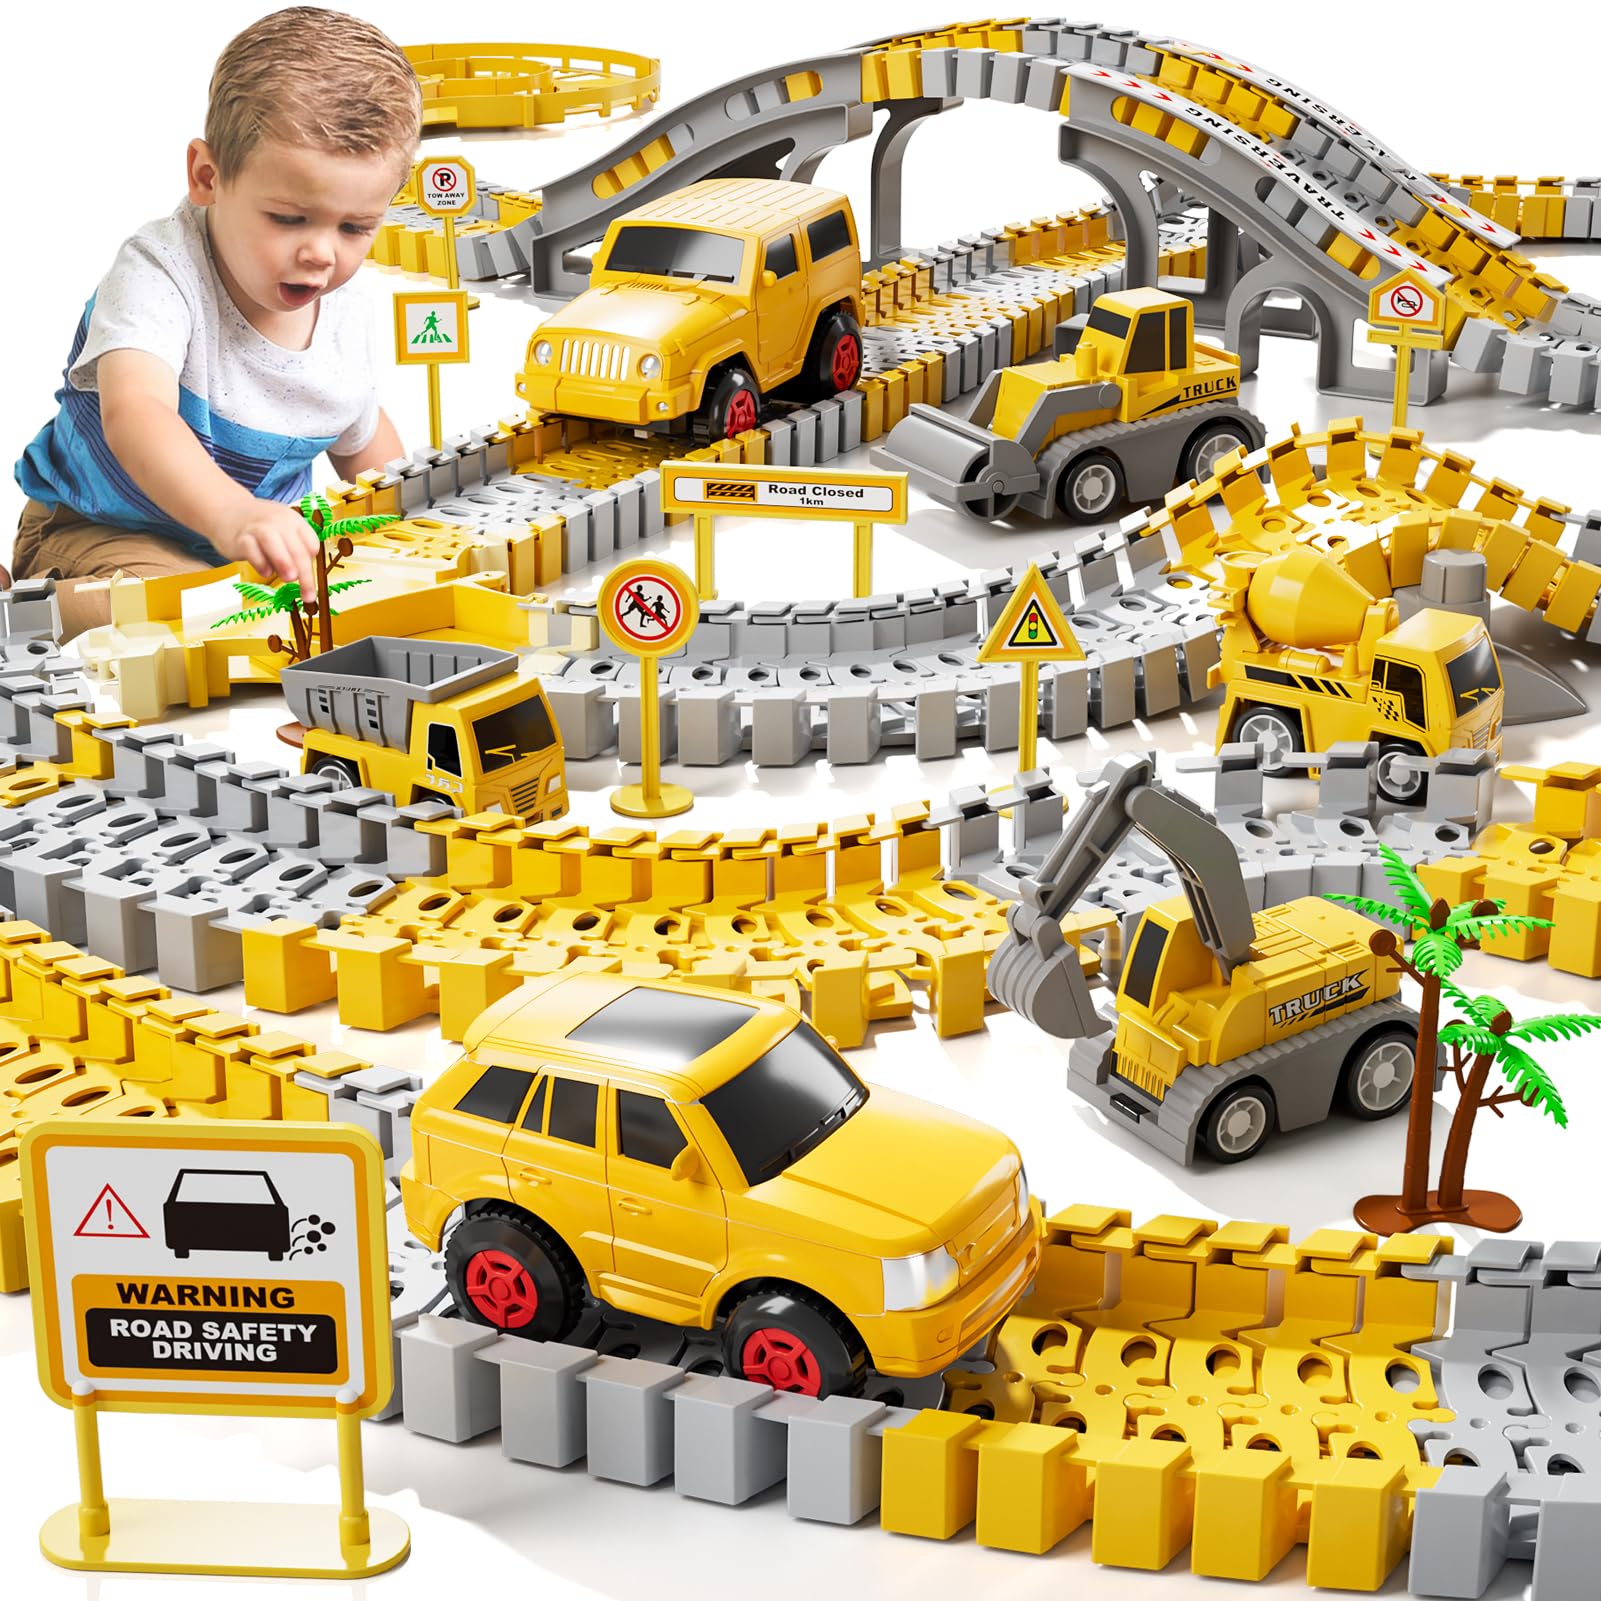 Limited-time deal: iHaHa Toddler Boy Toys for 3 4 5 6 Year Old, Total 236 PCS Construction Toys Race Tracks for Boys Kids Toys, Birthday Toys for 3 4 5 6 Year Old Boys Gi - $25.49